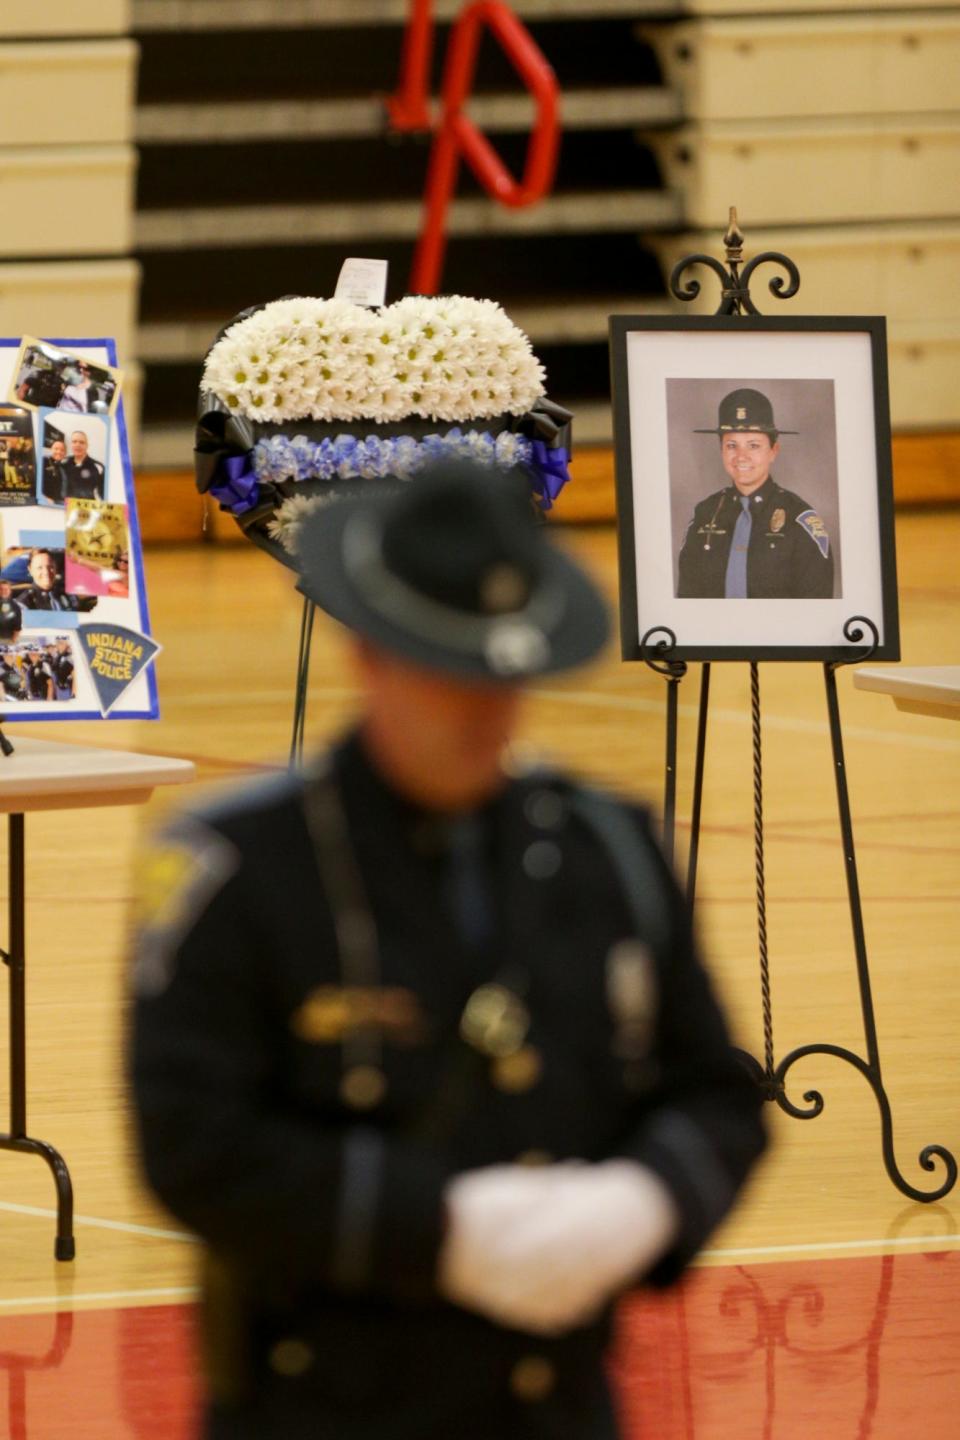 Community members and first responders pay their respects during calling hours for Indiana State Police Sgt. Stephanie Thompson and Mya Thompson, Thursday, Feb. 24, 2022 in Monticello. Sgt. Thompson and Mya, 17, died in an early-morning house fire in Monticello on Feb. 17.